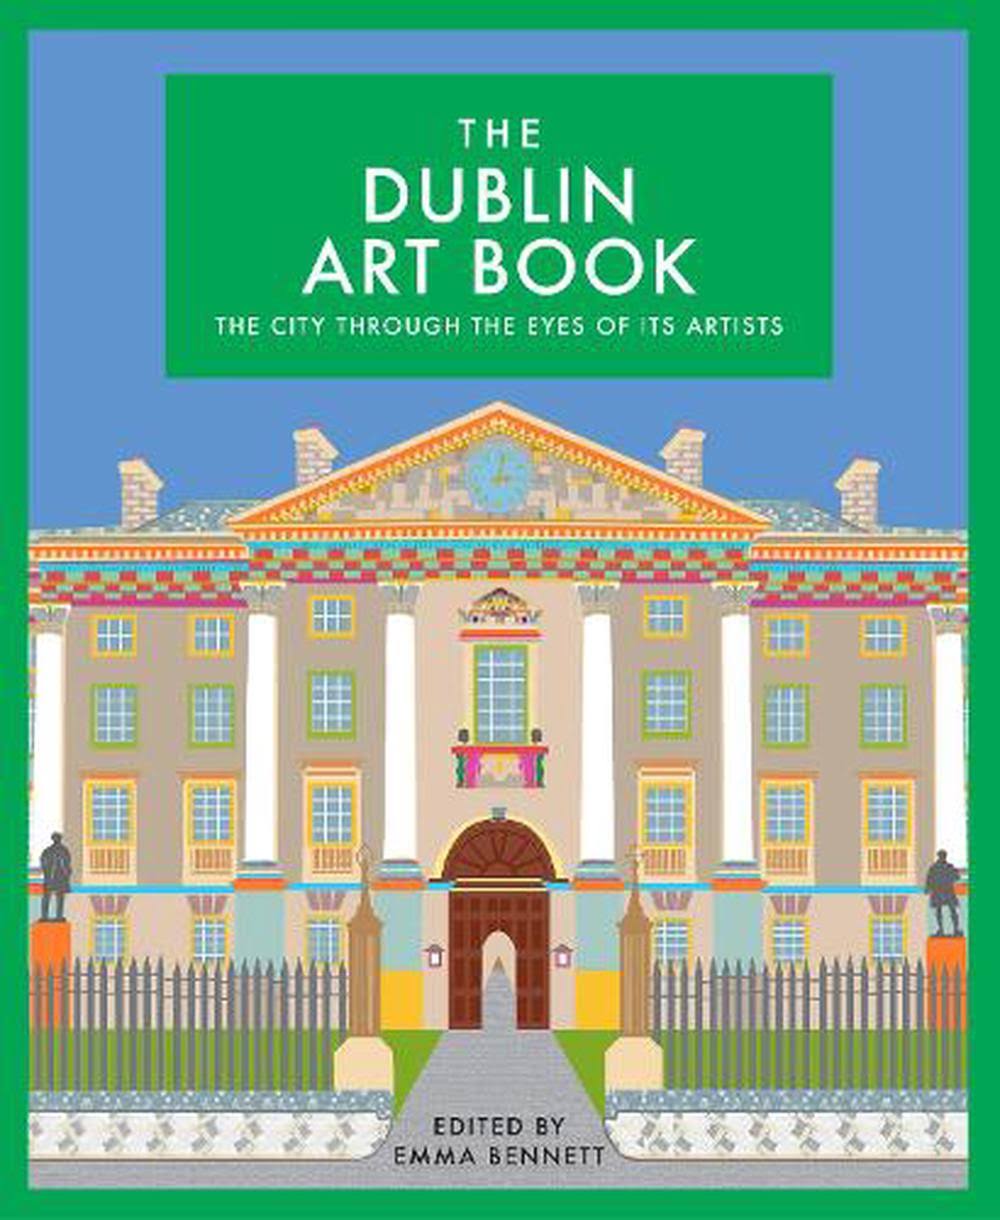 The Dublin Art Book: The City Through the Eyes of Its Artists [Book]